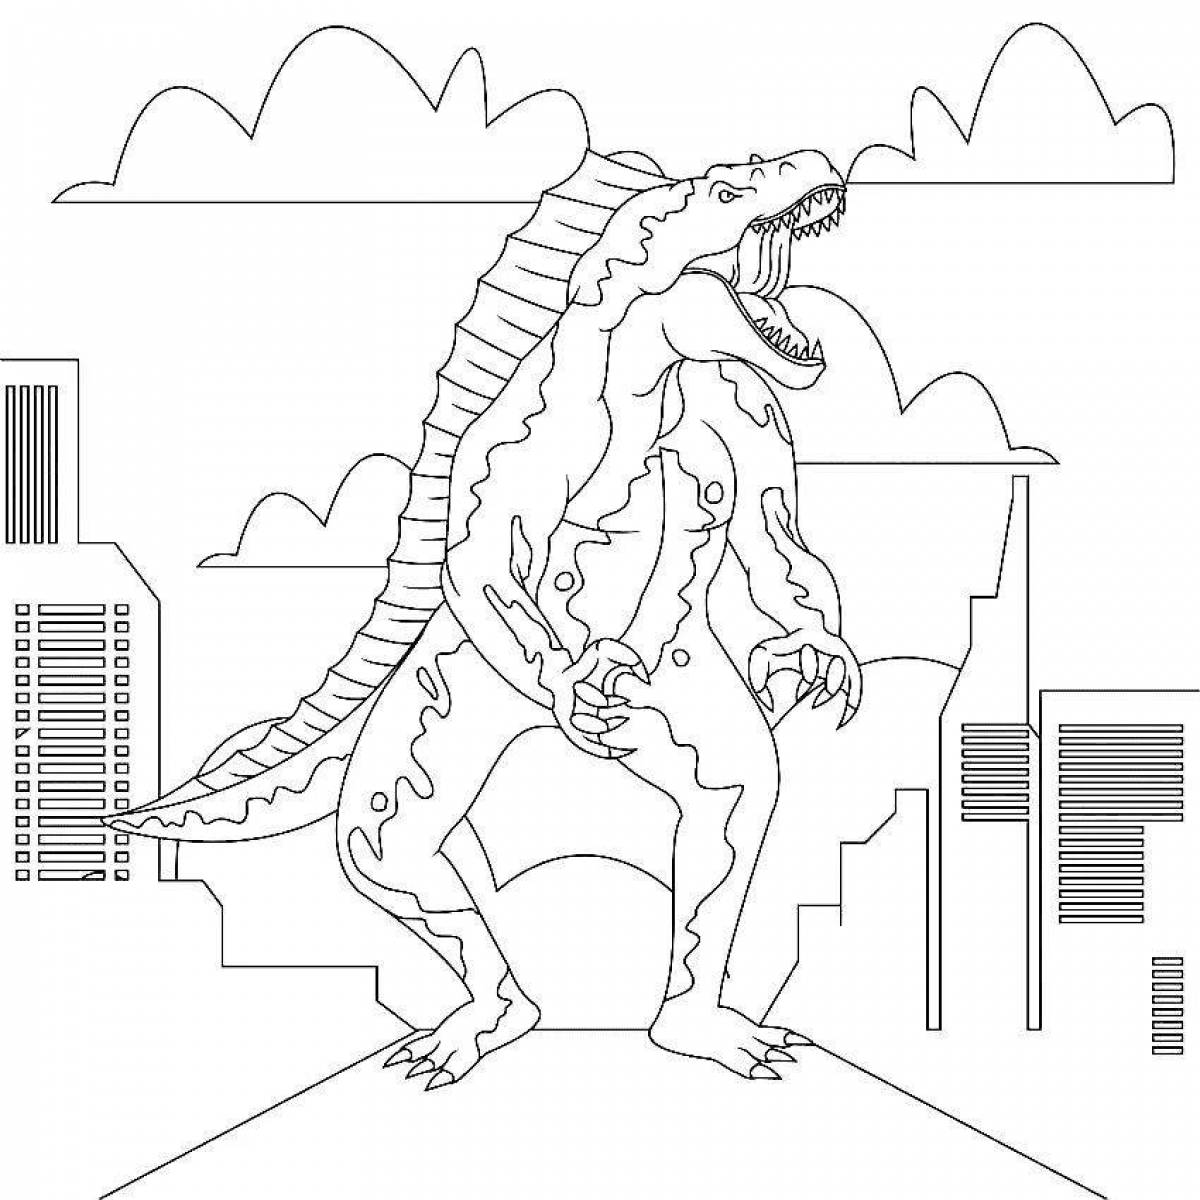 Godzilla coloring book for kids